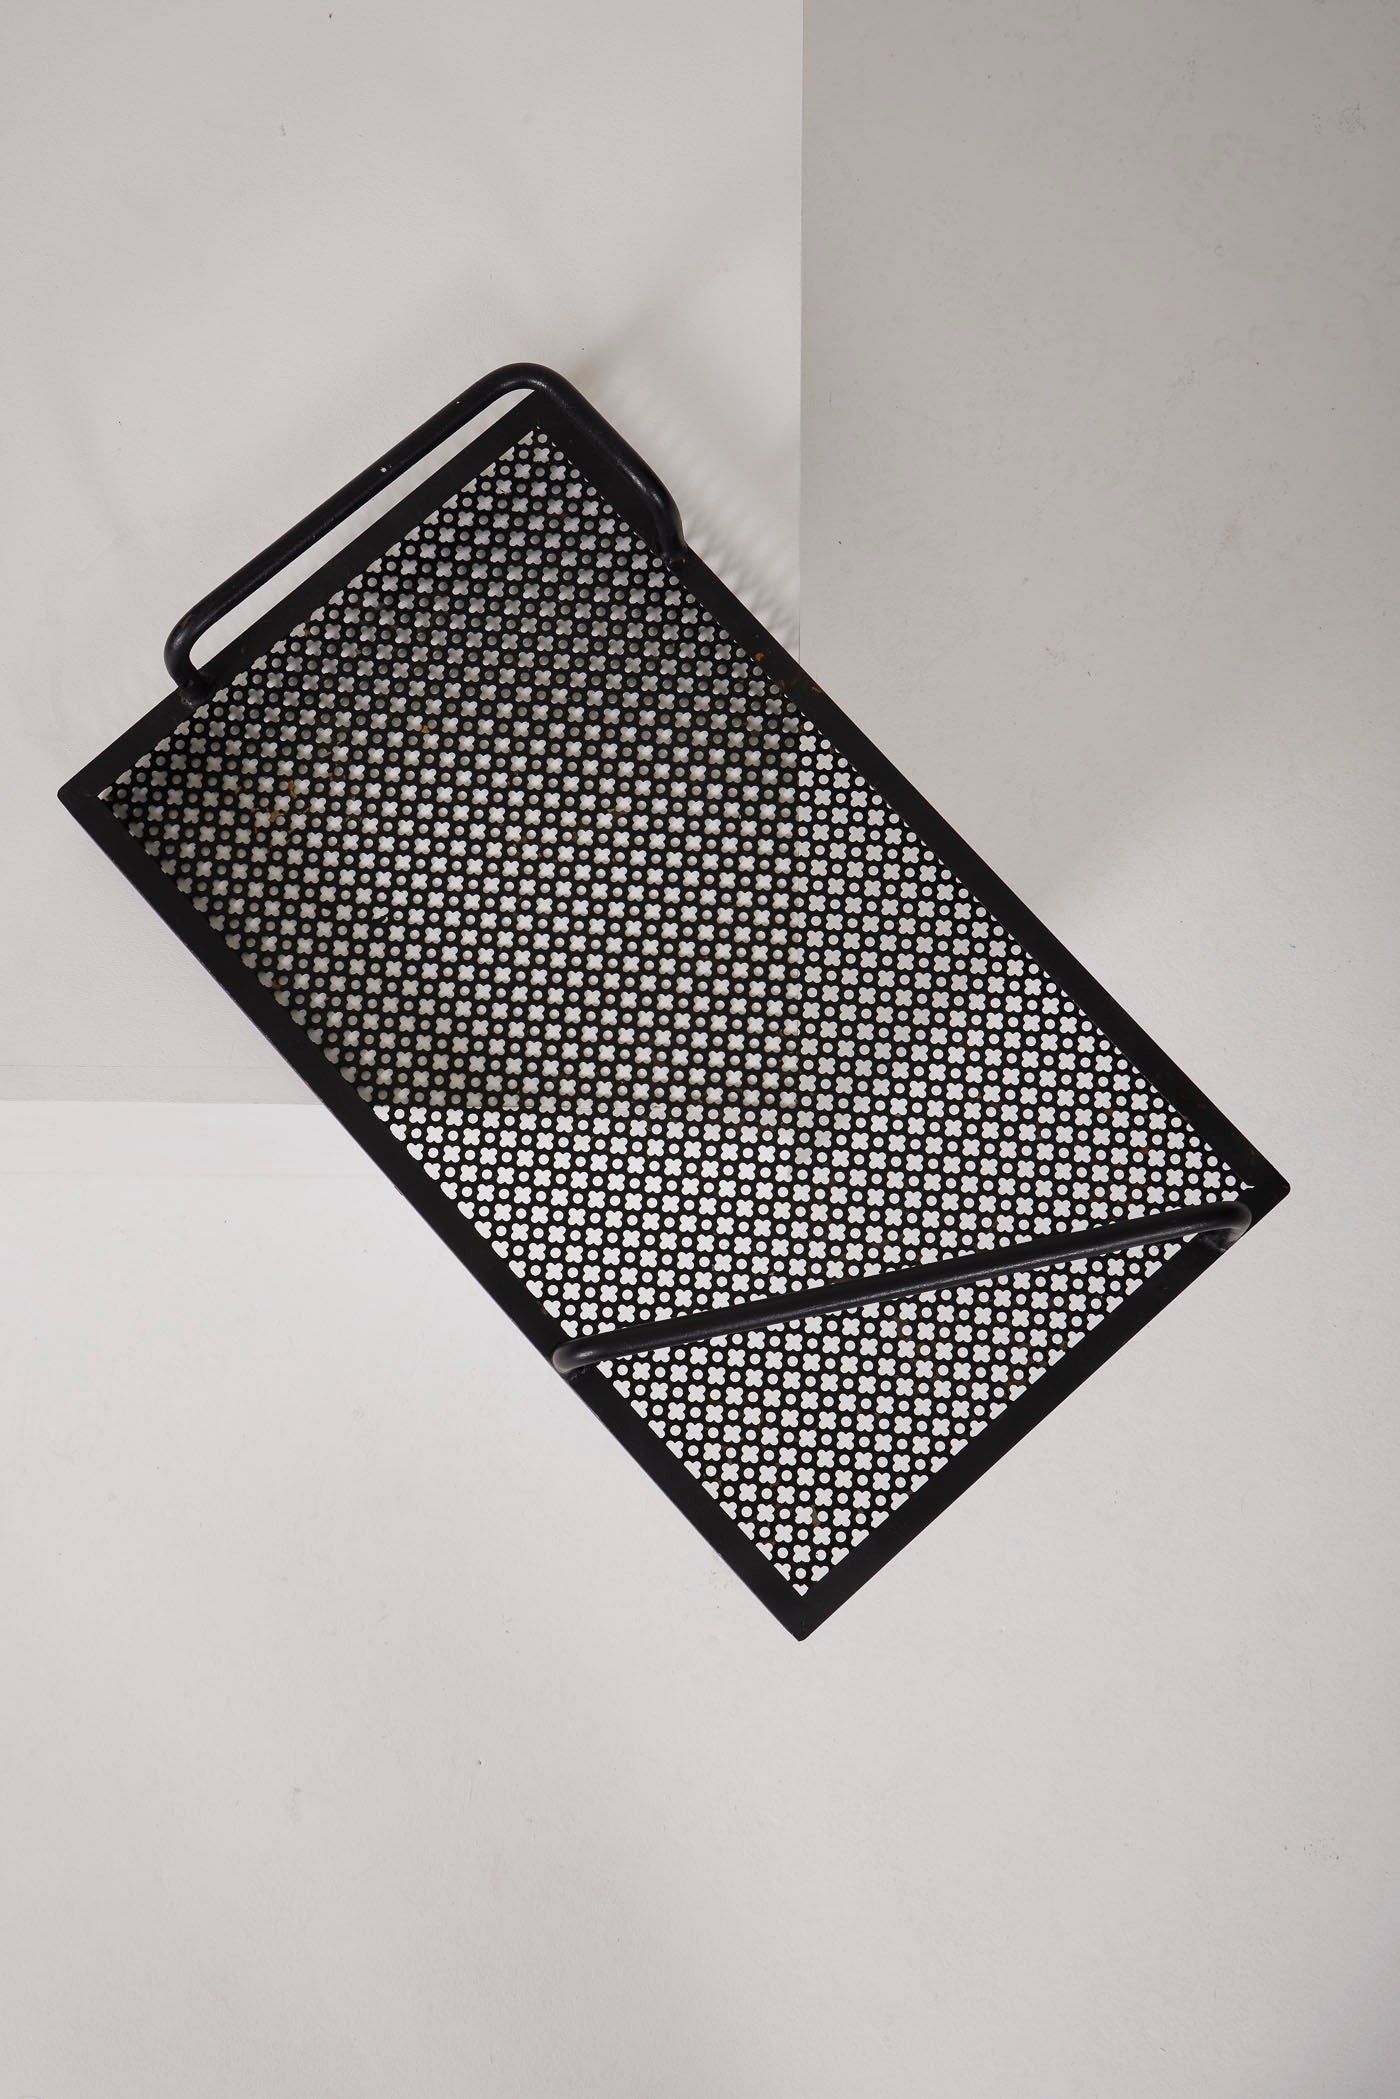 Perforated metal tray 